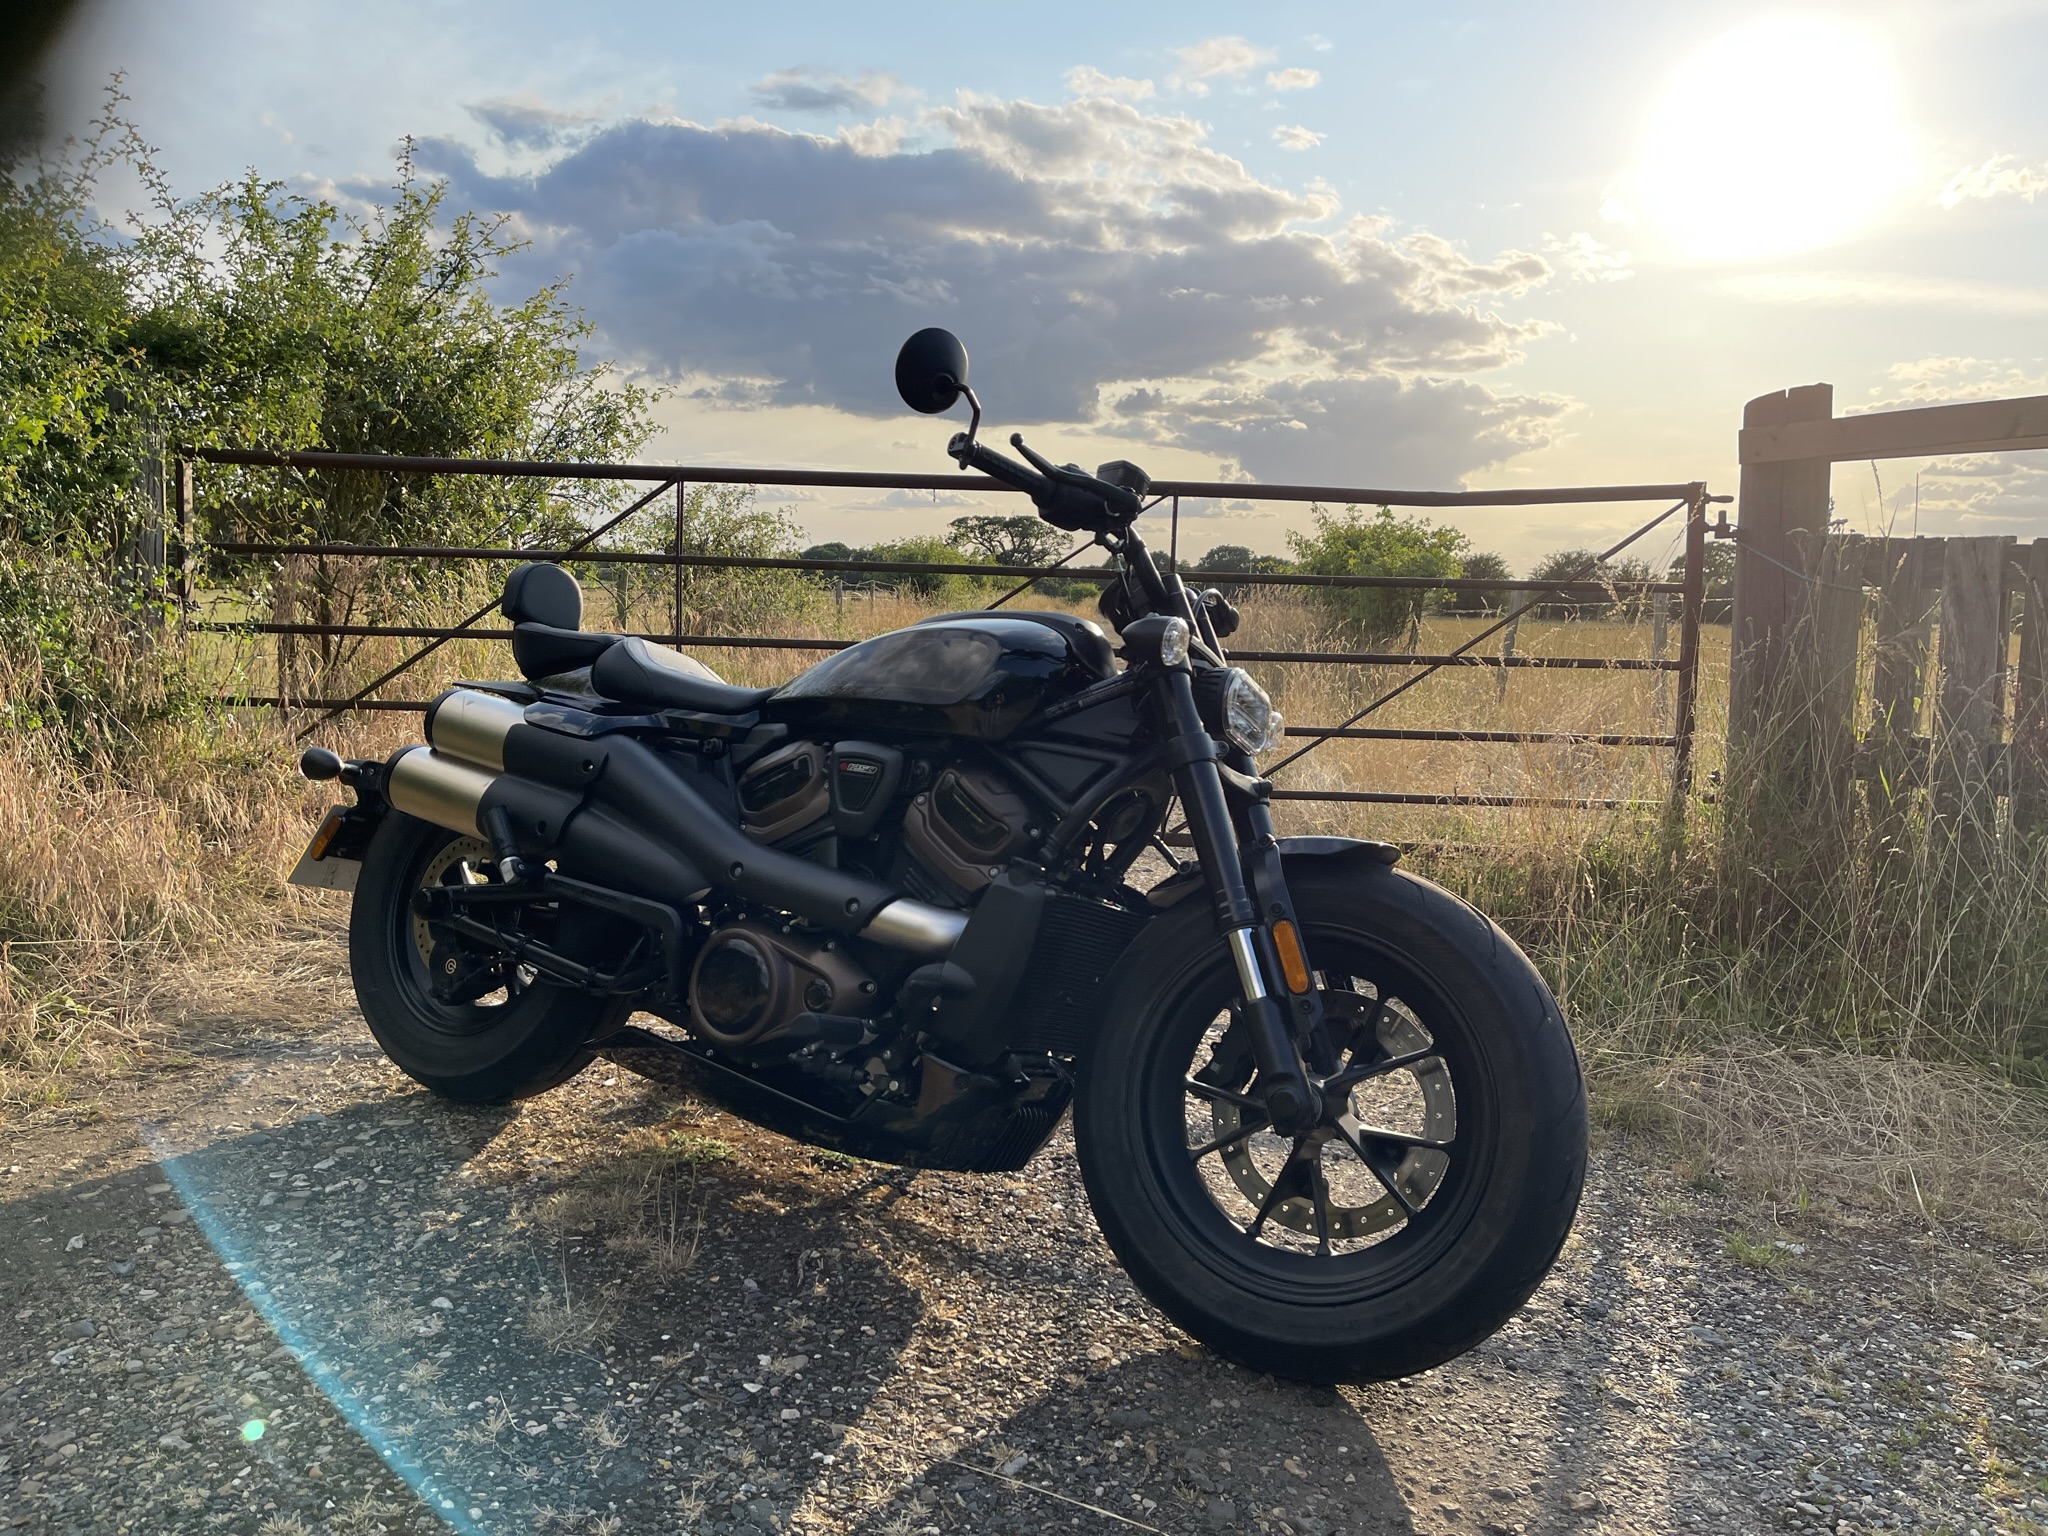 Harley-Davidson Sportster S UK review countryside